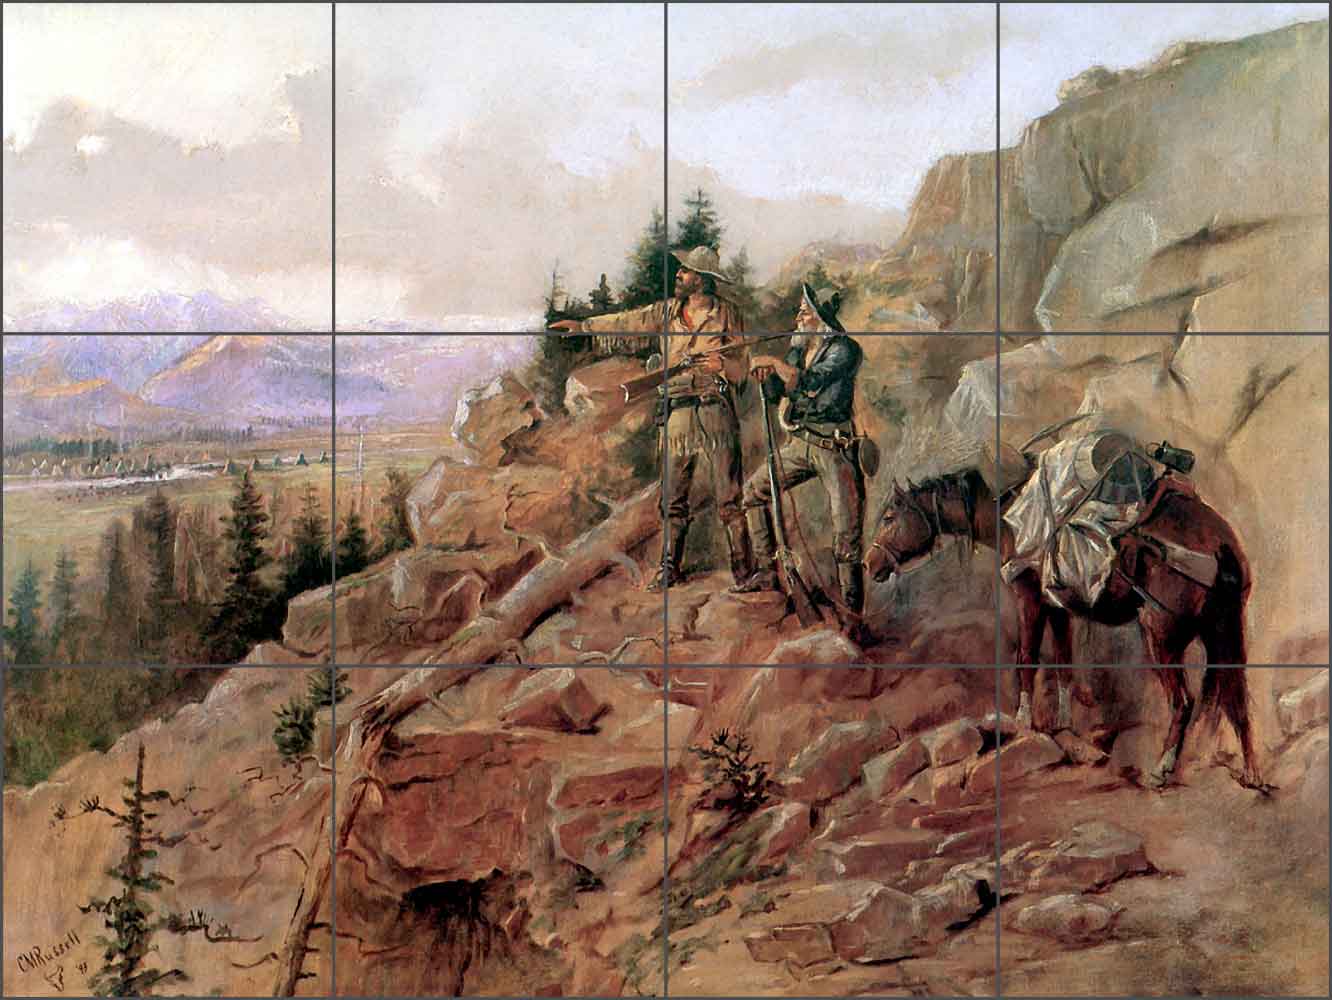 Trouble on the Horizon by Charles M. Russell Ceramic Tile Mural - CMR009